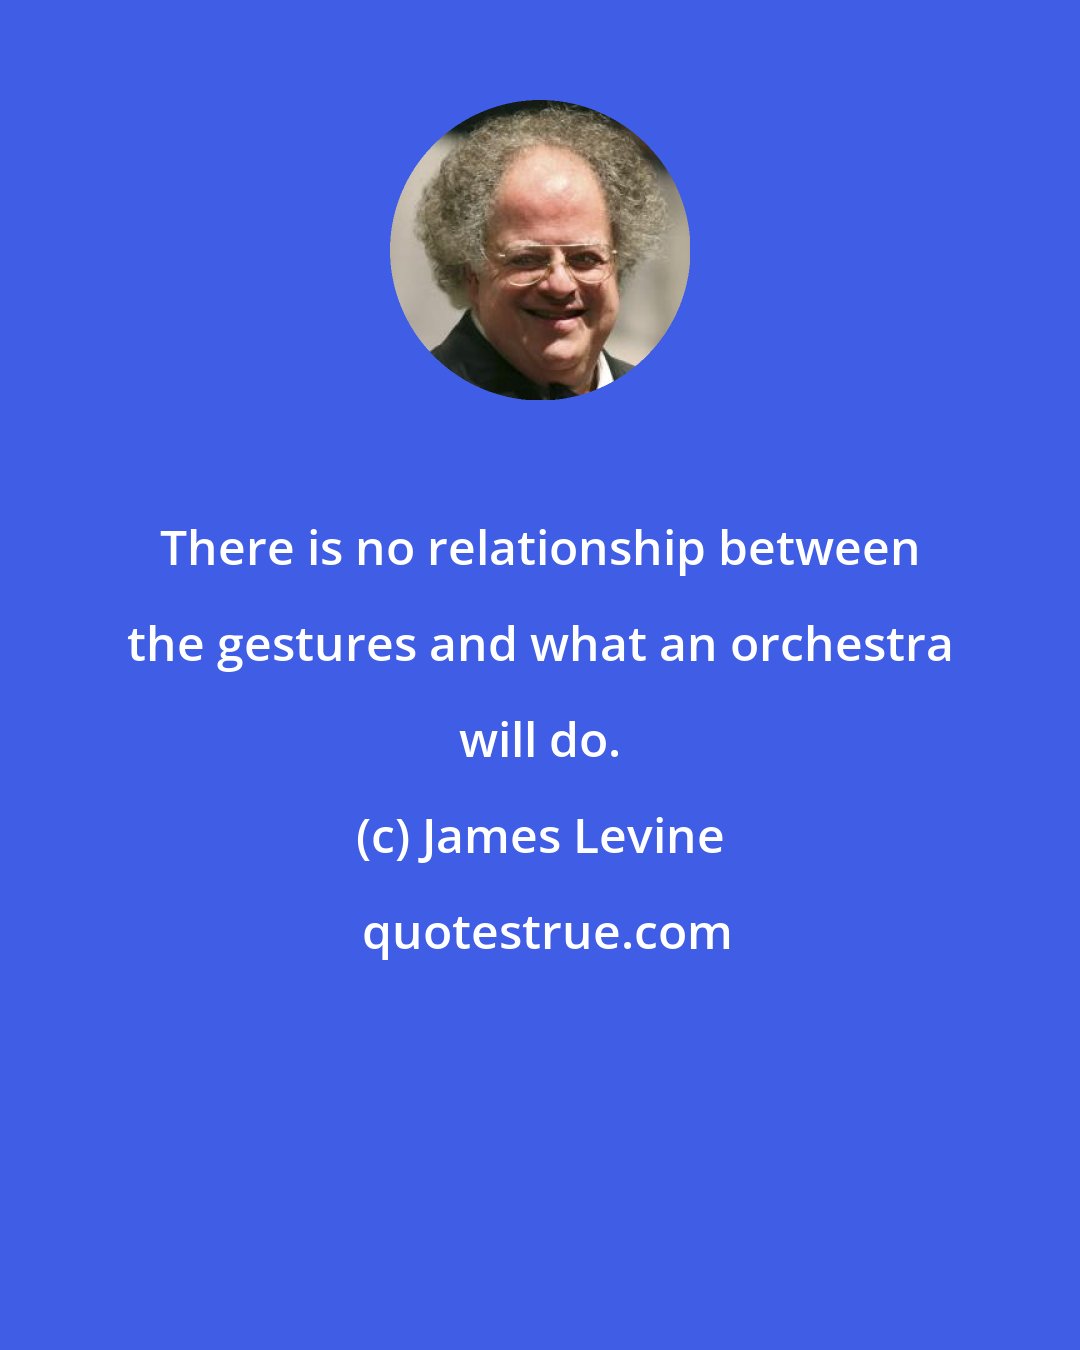 James Levine: There is no relationship between the gestures and what an orchestra will do.